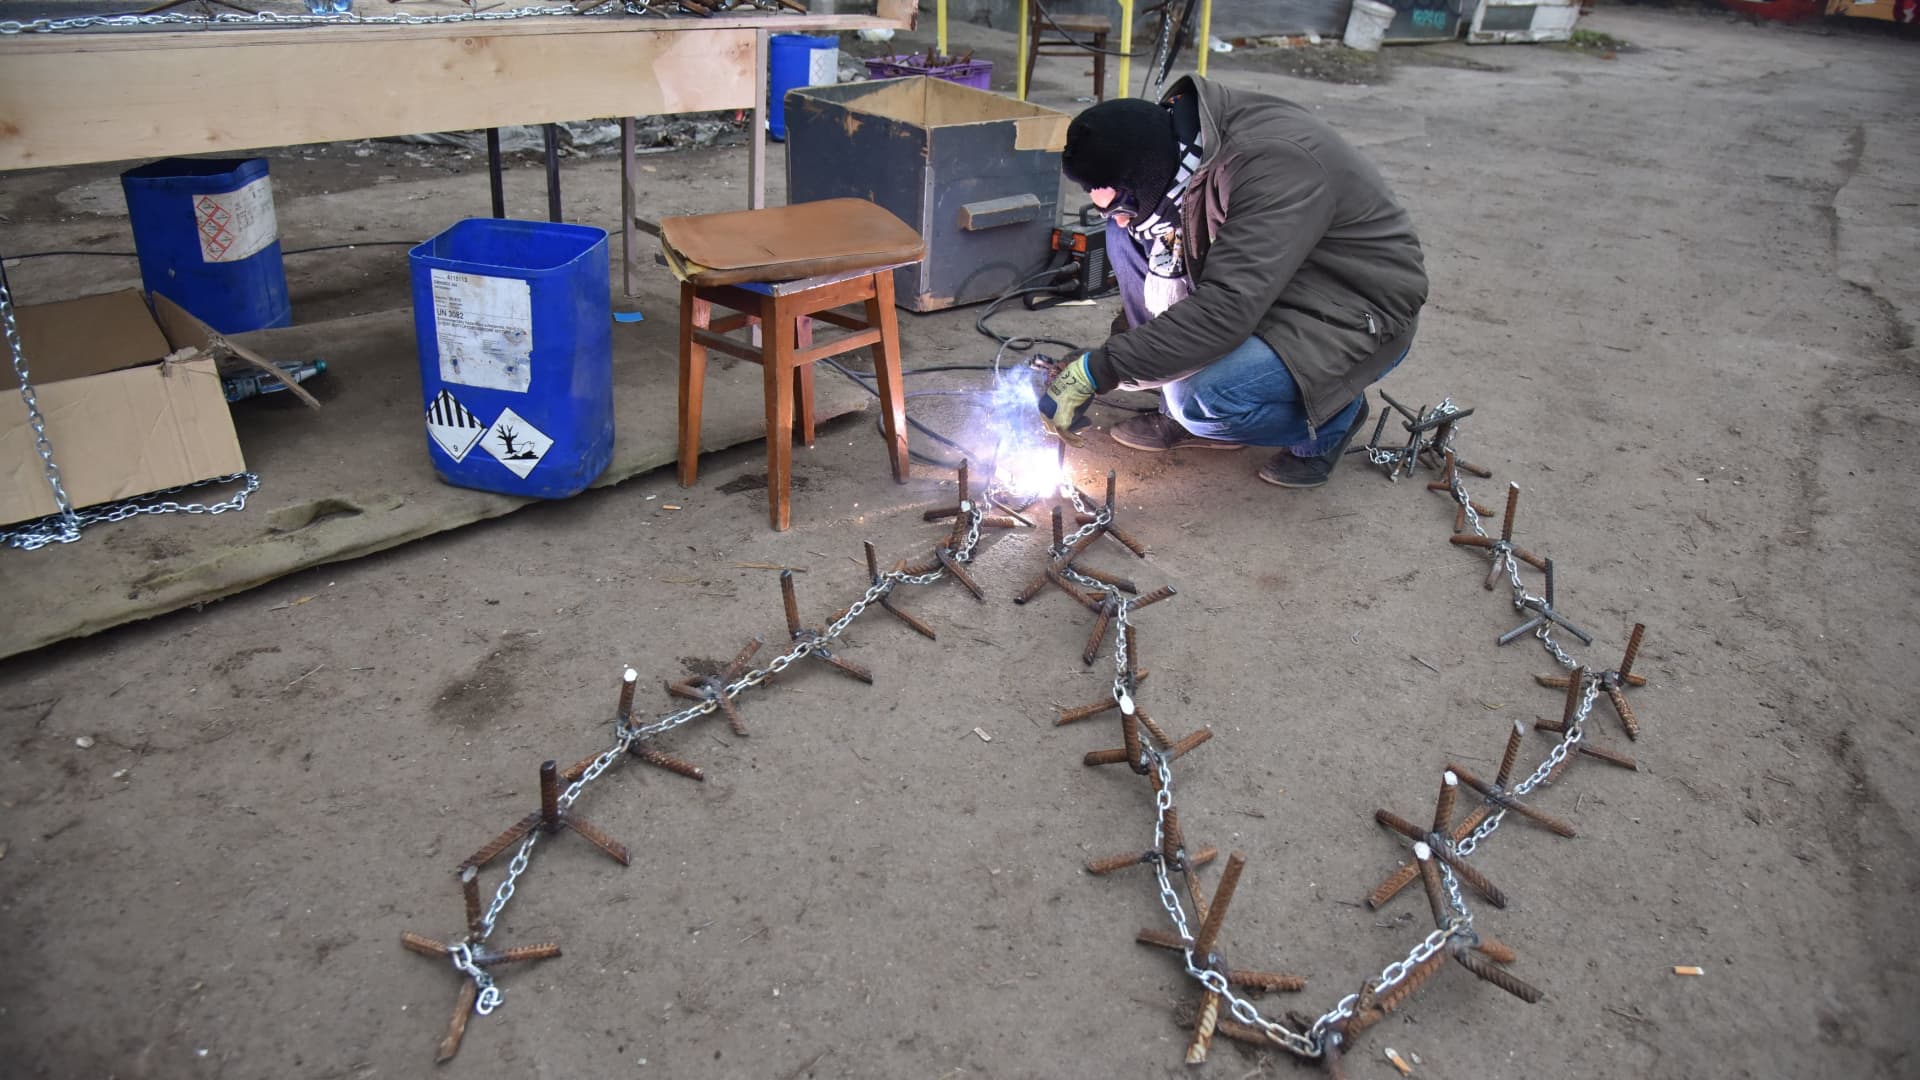 A volunteer welds an anti-vehicle obstacle during Ukraine-Russia conflict in Lviv, Ukraine March 5, 2022.